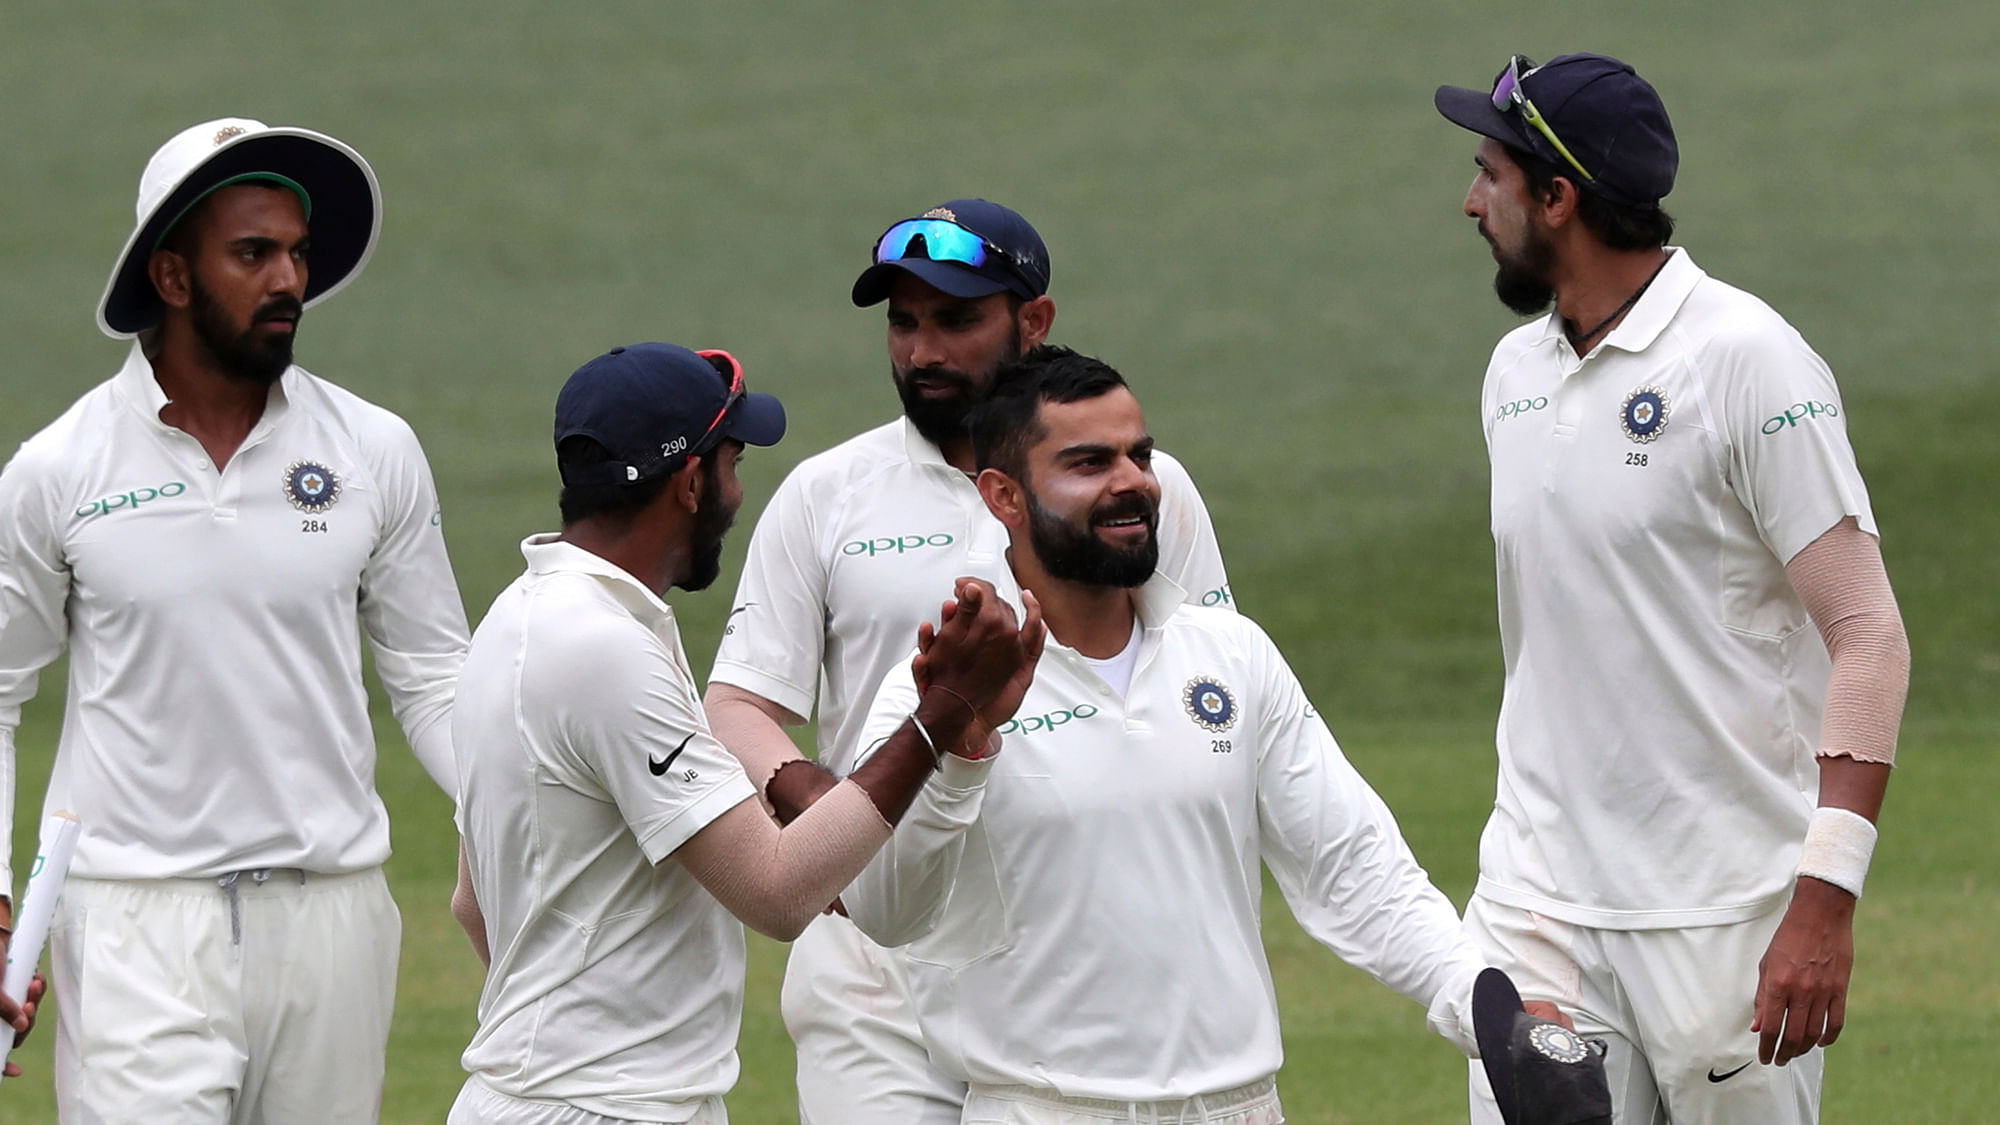 India beat Australia by 31 runs to win the test series opener in Adelaide.&nbsp;